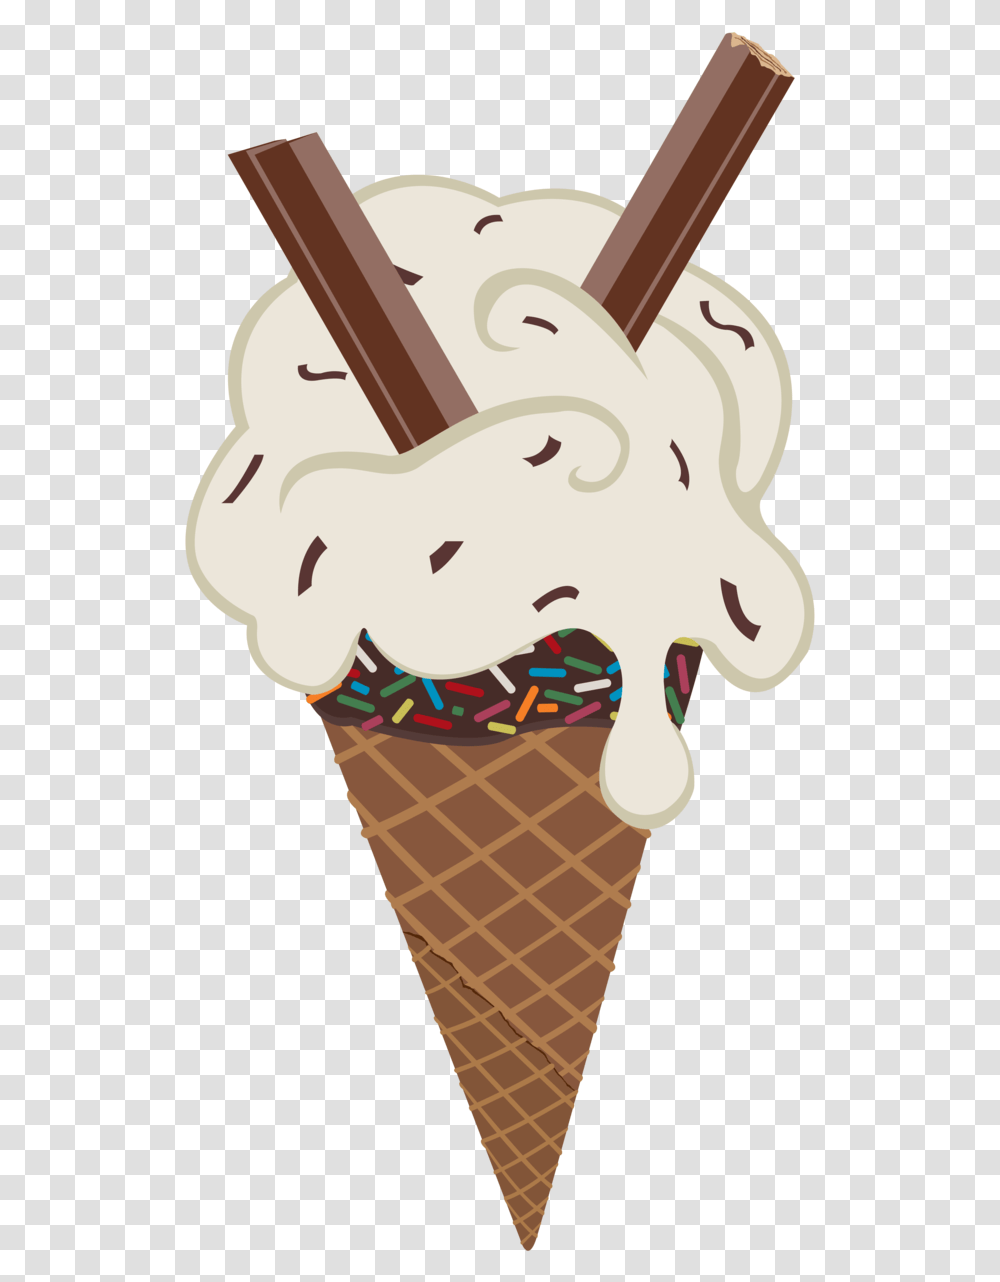 Ice Cream Cone Cm By Arctickiwi On Clipart Library Ice Cream Mlp, Dessert, Food, Creme, Sweets Transparent Png